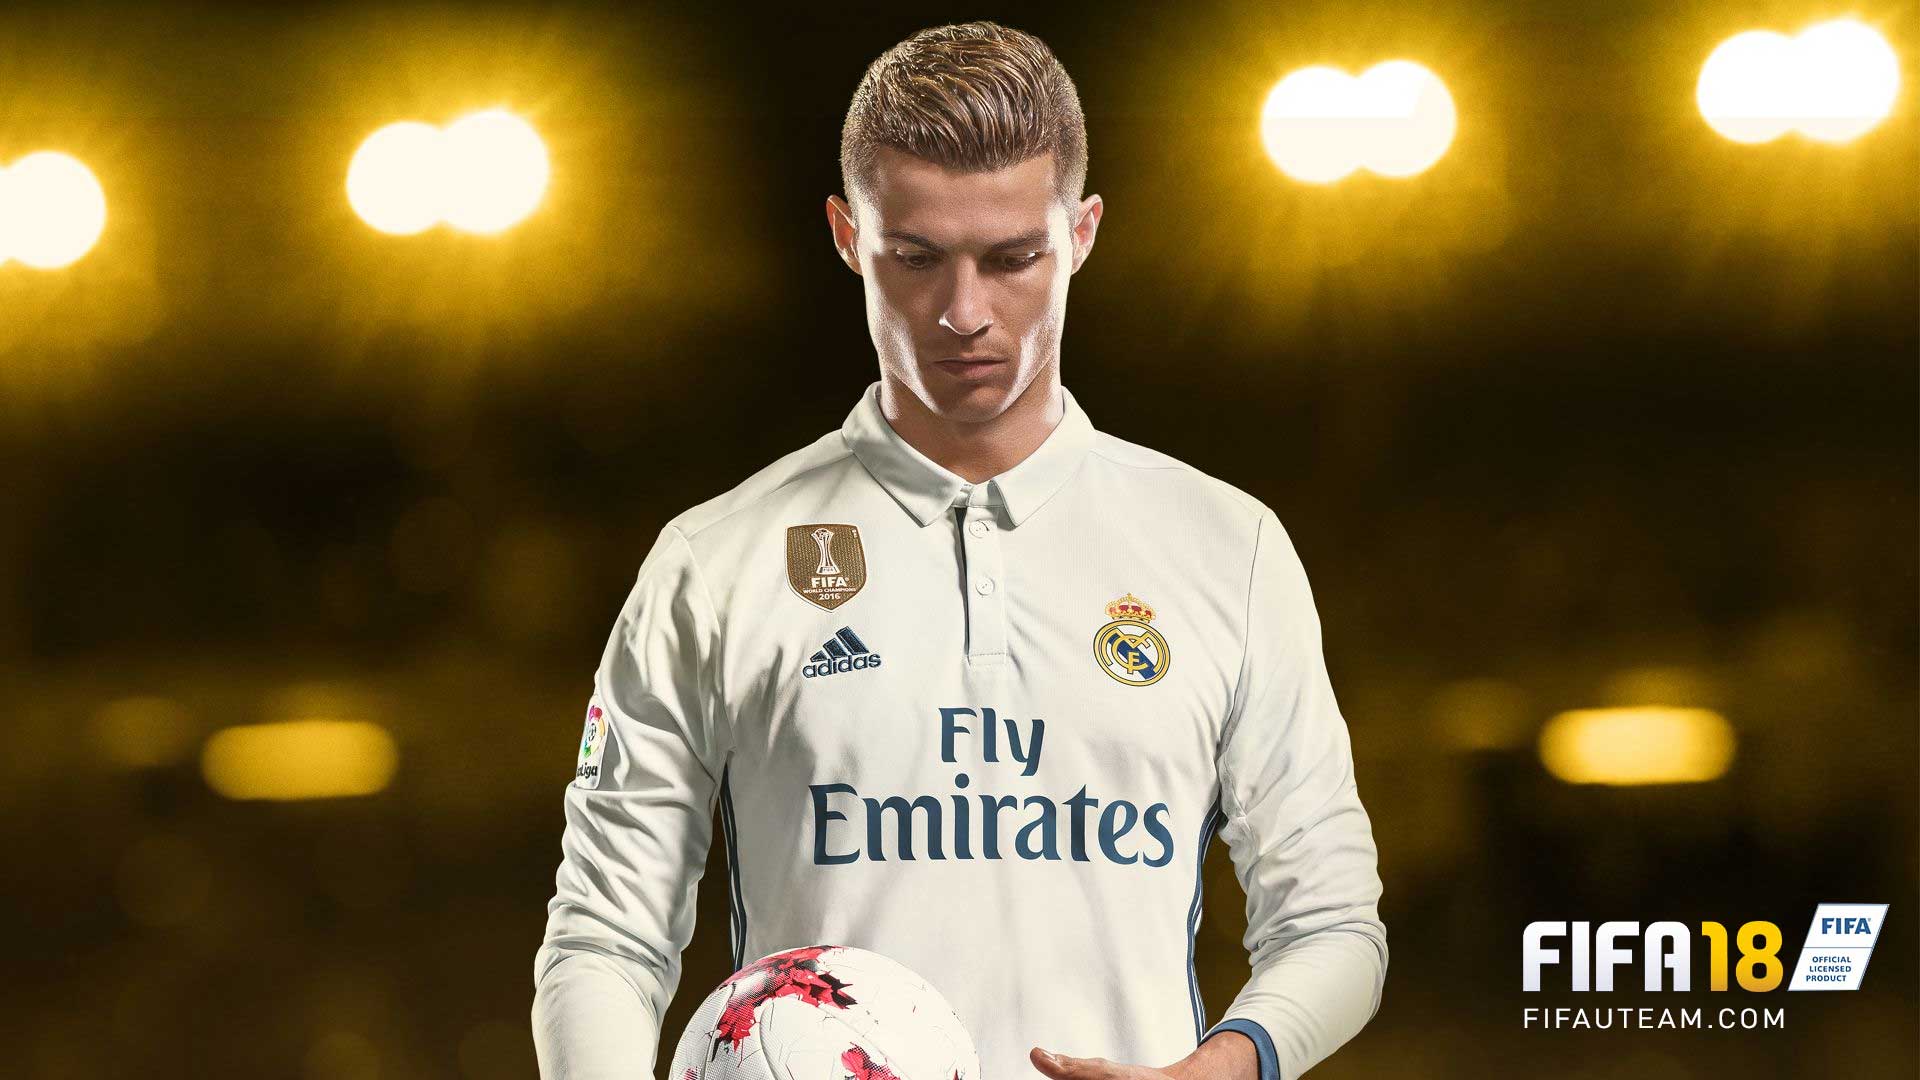 FIFA 18 Covers - Every Single Official FIFA 18 Cover